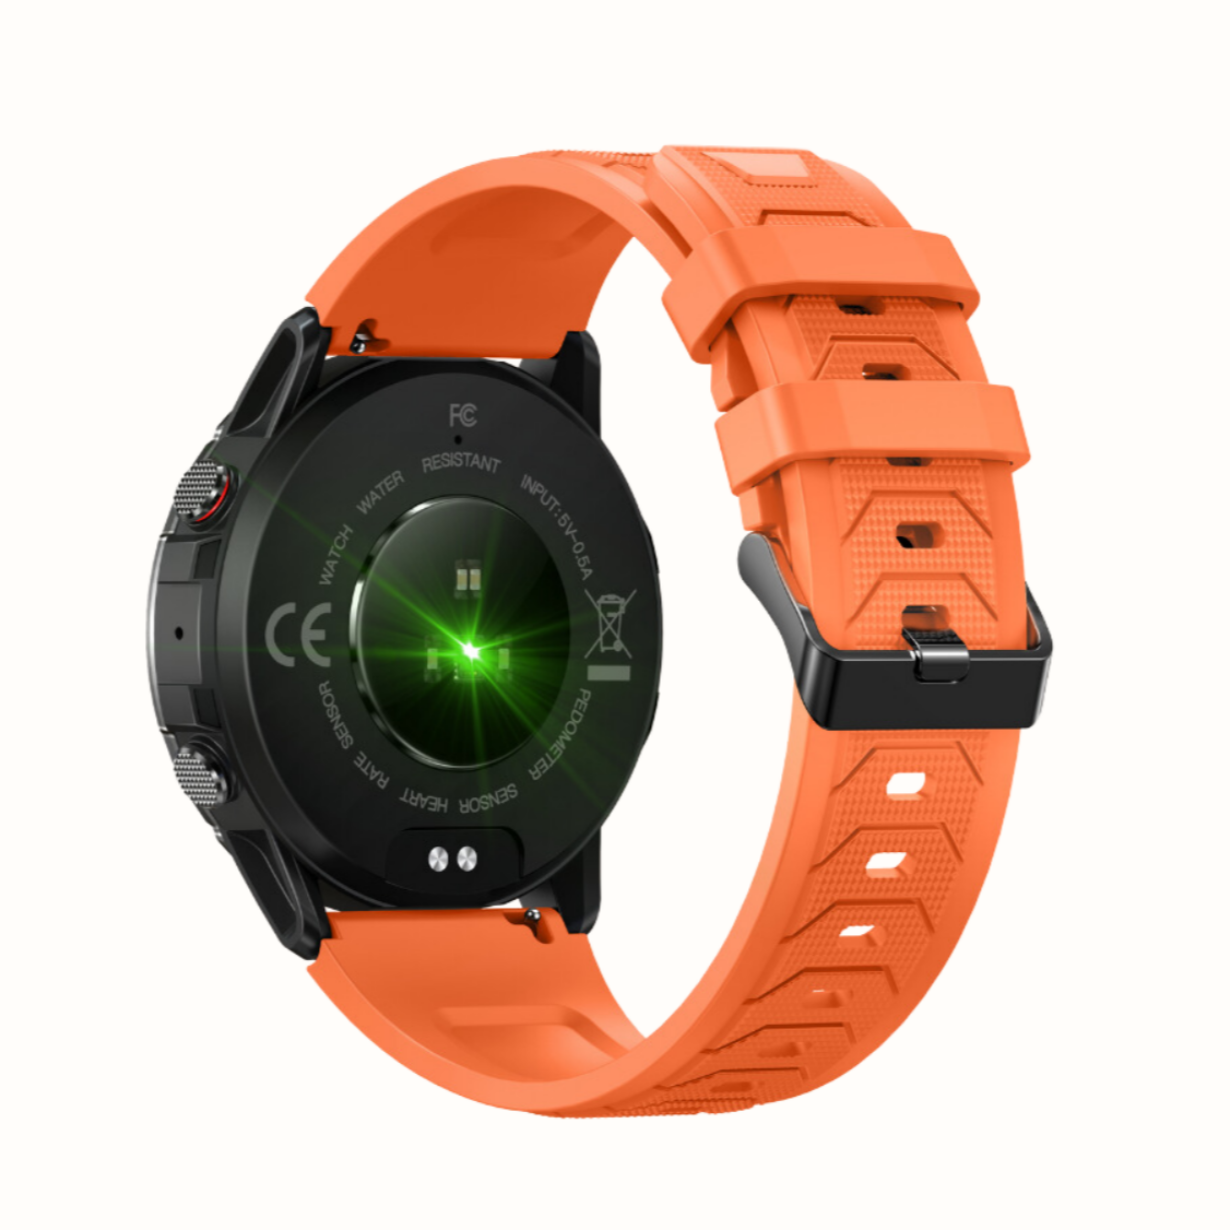 NX10 Sport Smartwatch, AMOLED Display, Setup with Android device, Setup with Apple Device, Water resistance - IP68, Best Smart Watch, 2023, Track Activity,Track WOmens Health, Pedometer, Calorie Monitor, Sleep Tracking, Heart Rate Monitor, Blood Oxygen Monitor- Spo2, Multisport Mode, Color - Orange